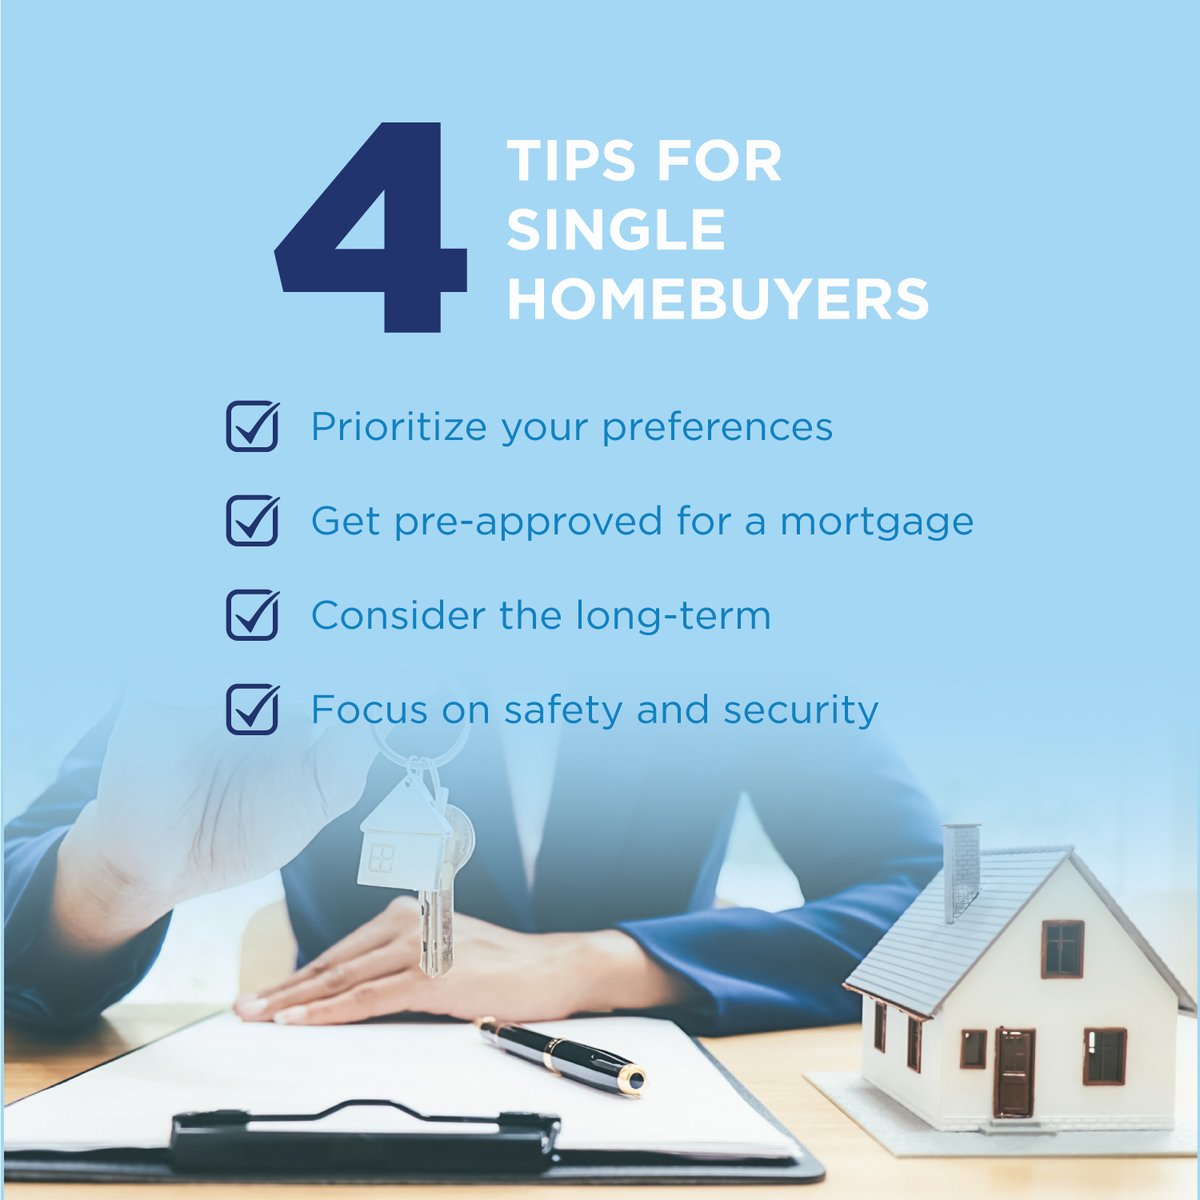 𝟰 𝗧𝗶𝗽𝘀 𝗳𝗼𝗿 𝘀𝗶𝗻𝗴𝗹𝗲 𝗵𝗼𝗺𝗲𝗯𝘂𝘆𝗲𝗿𝘀

Remember, working with a #realestate agent can provide invaluable assistance throughout the #homebuying process.

#realestatelife #dreamhome #estateagentsuk #EstateAgentsBarking #EstateAgentsIlford #homebuyers #buyingahome